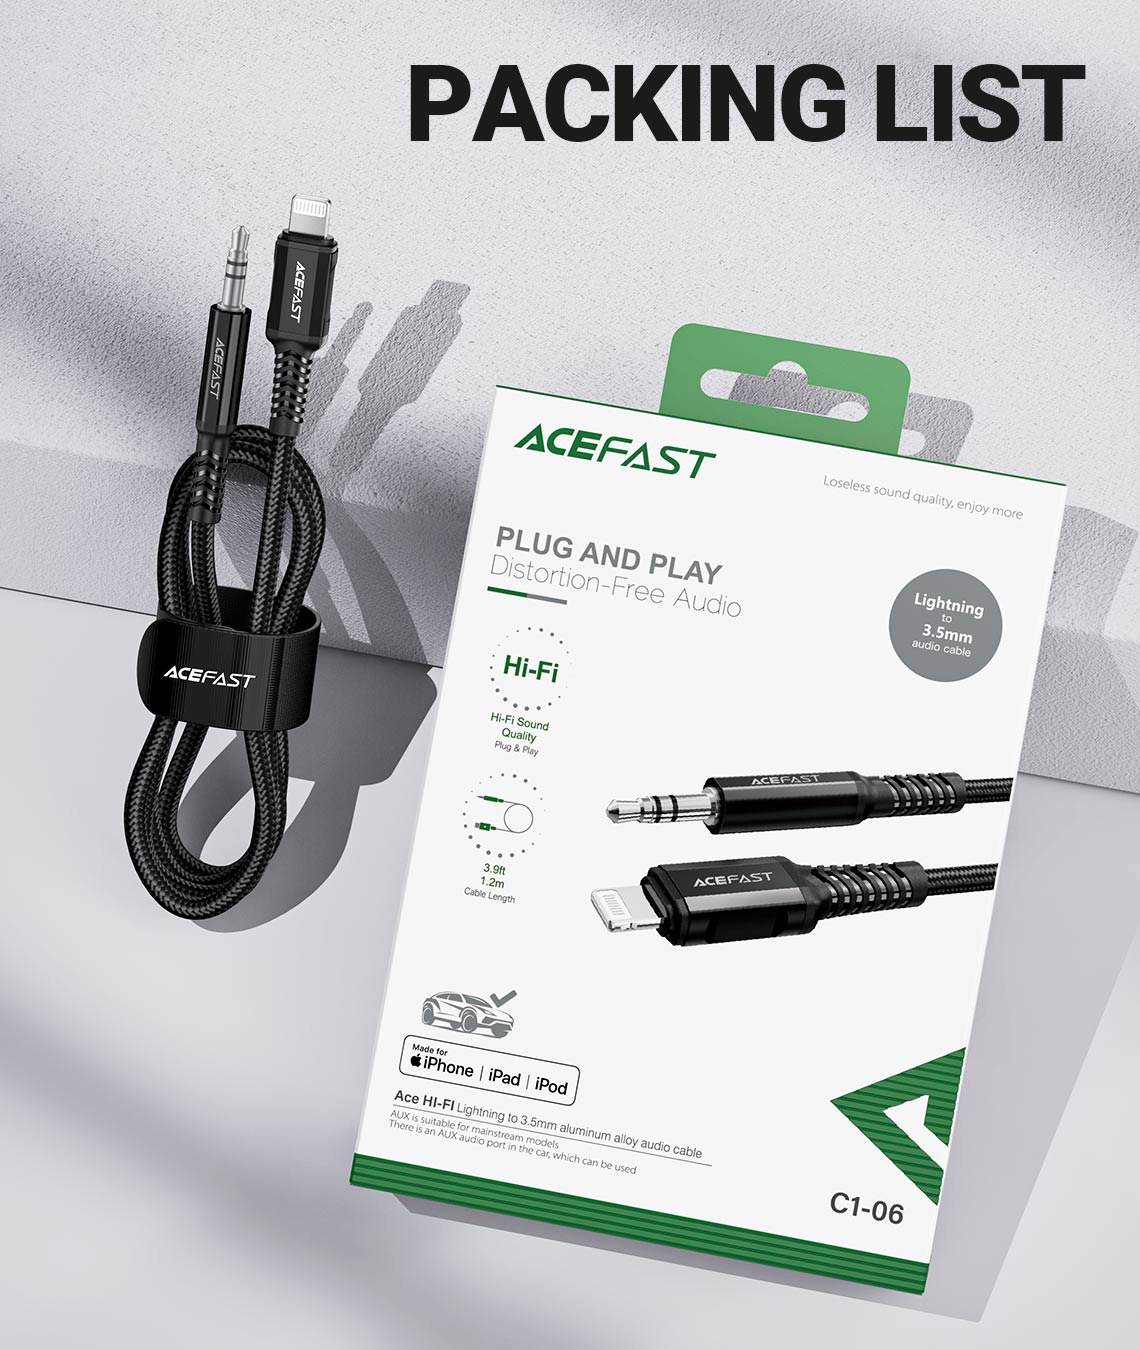 acefast c1 06 audio cable packing list